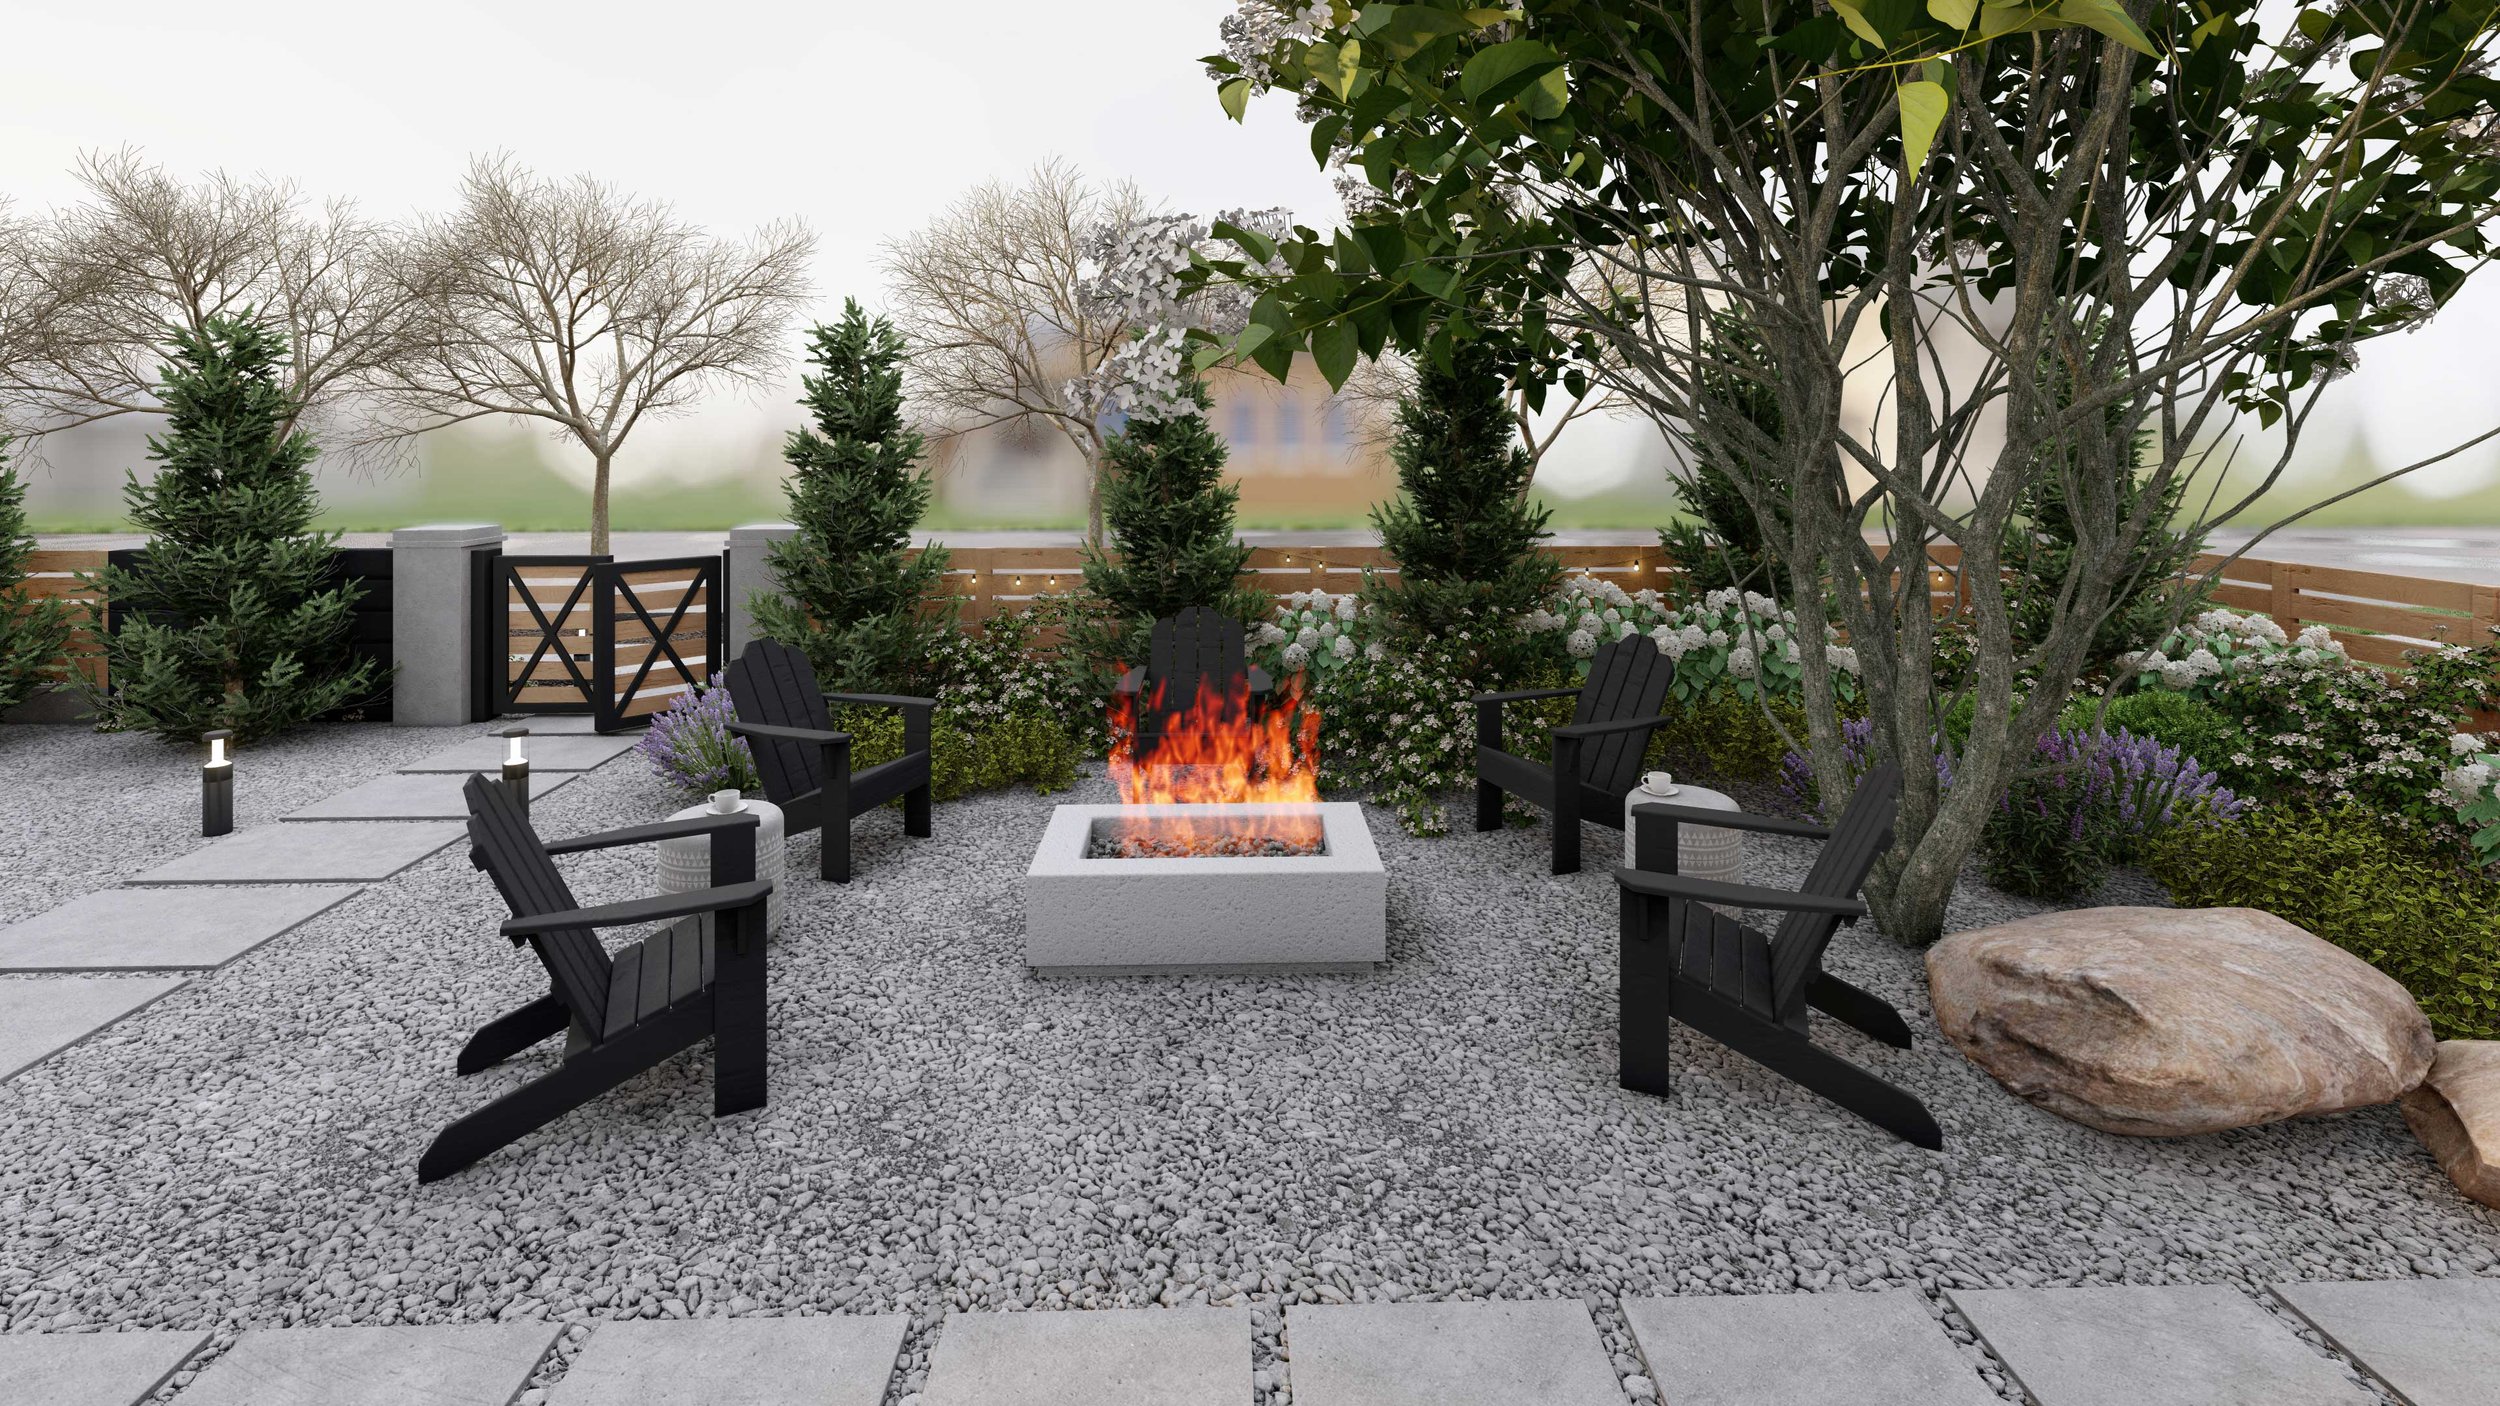  Balancing natural details (boulders, native planting, river rock-colored gravel) with modern flourishes (oversized pavers, concrete fire pit, horizontal fencing) provides compelling contrast. 